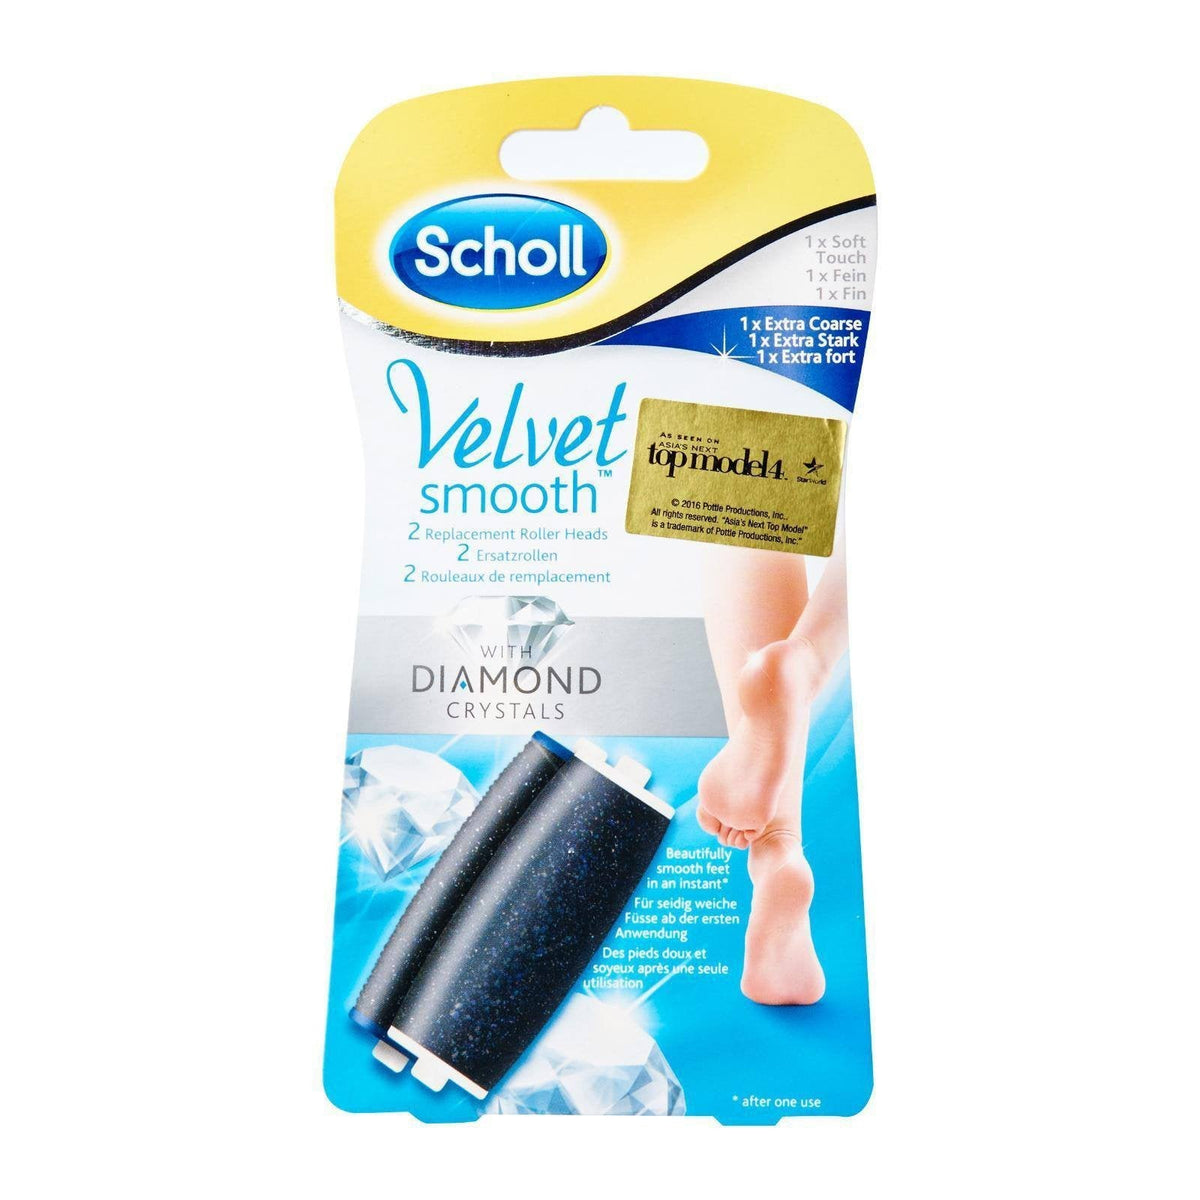 Scholl - Roller Refill Mix Pack of 2 (Black) -  Body Care  Durio.sg